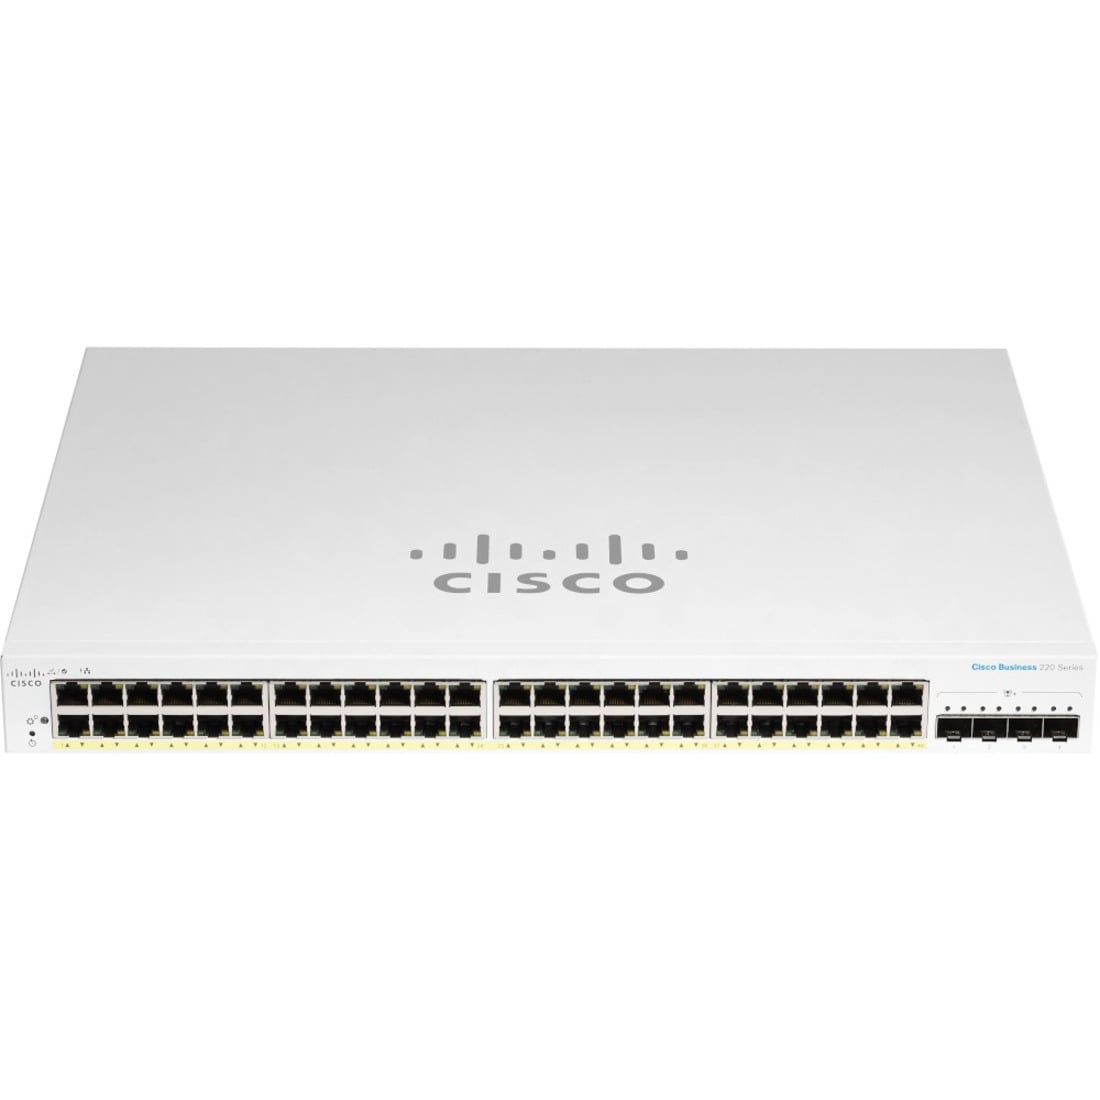 Picture of Cisco Systems CBS220-48P-4X-NA 48 Port GE PoE 4 x 10G SFP Plus Ethernet Smart Switch, White